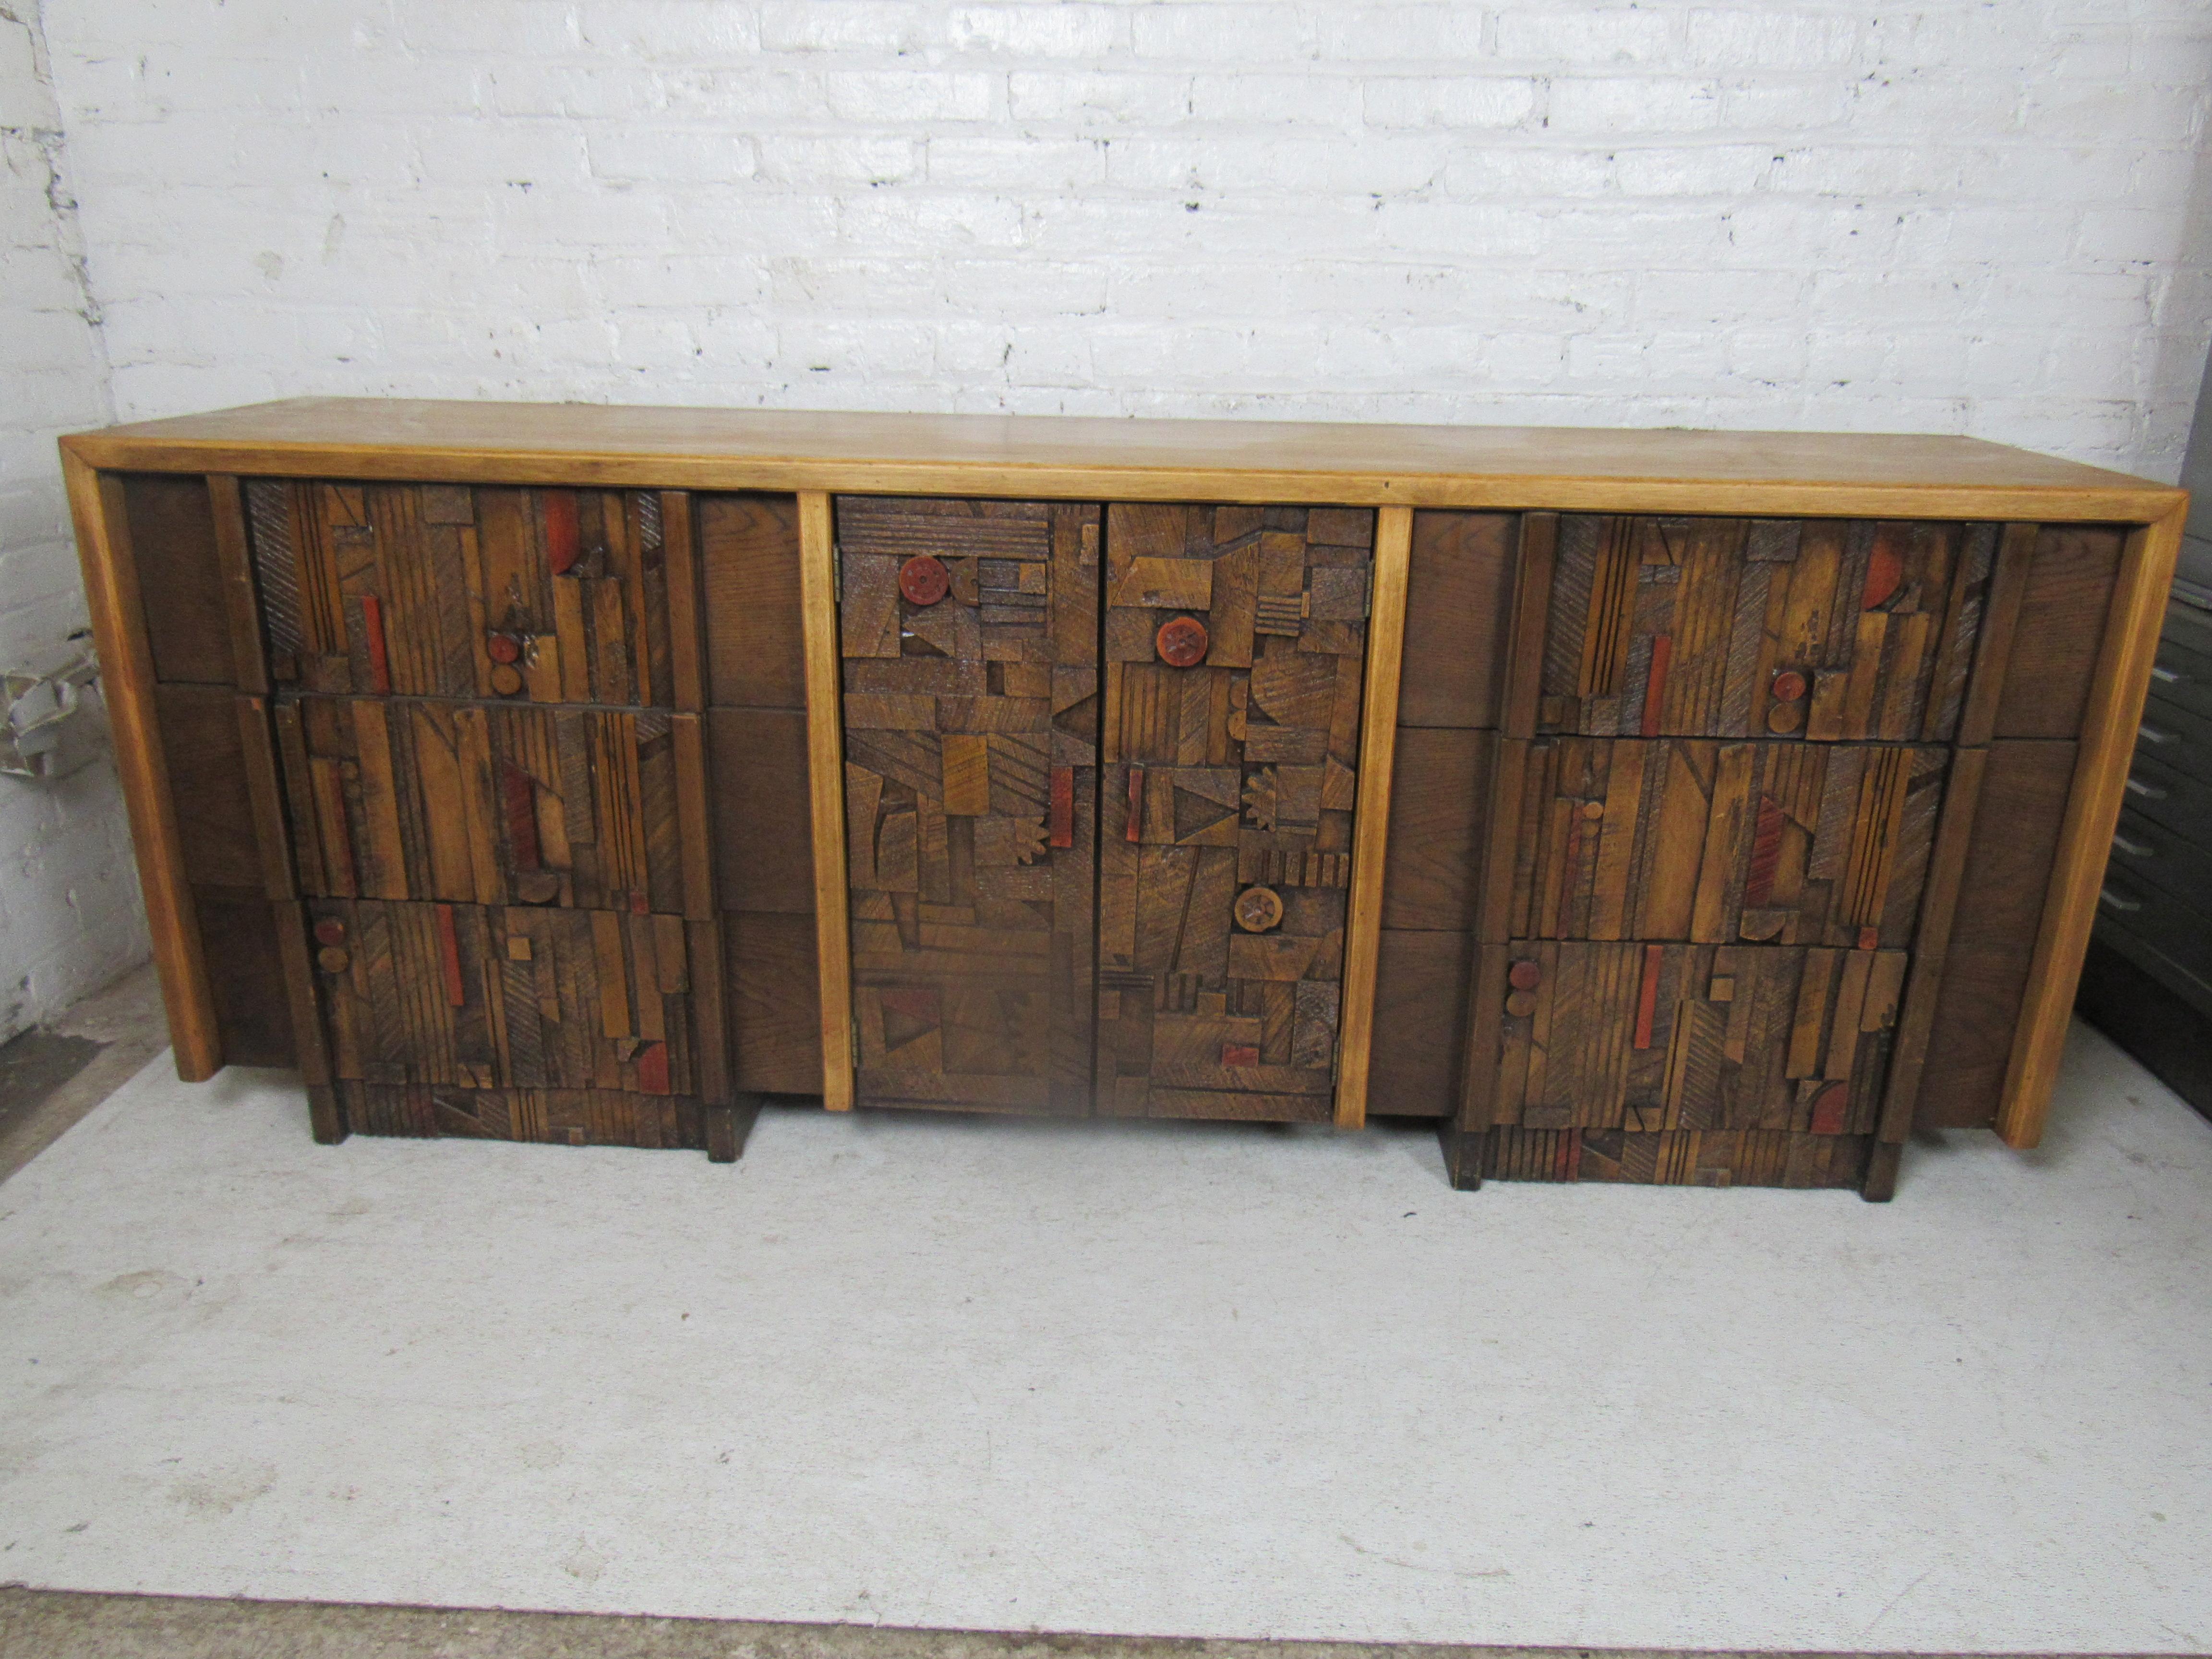 Mid-Century Modern Brutalist nine-drawer dresser by Lane features a sculpted Brutalist front.
The dresser would make a great addition to any home.

Please confirm item location NY or NJ with dealer.